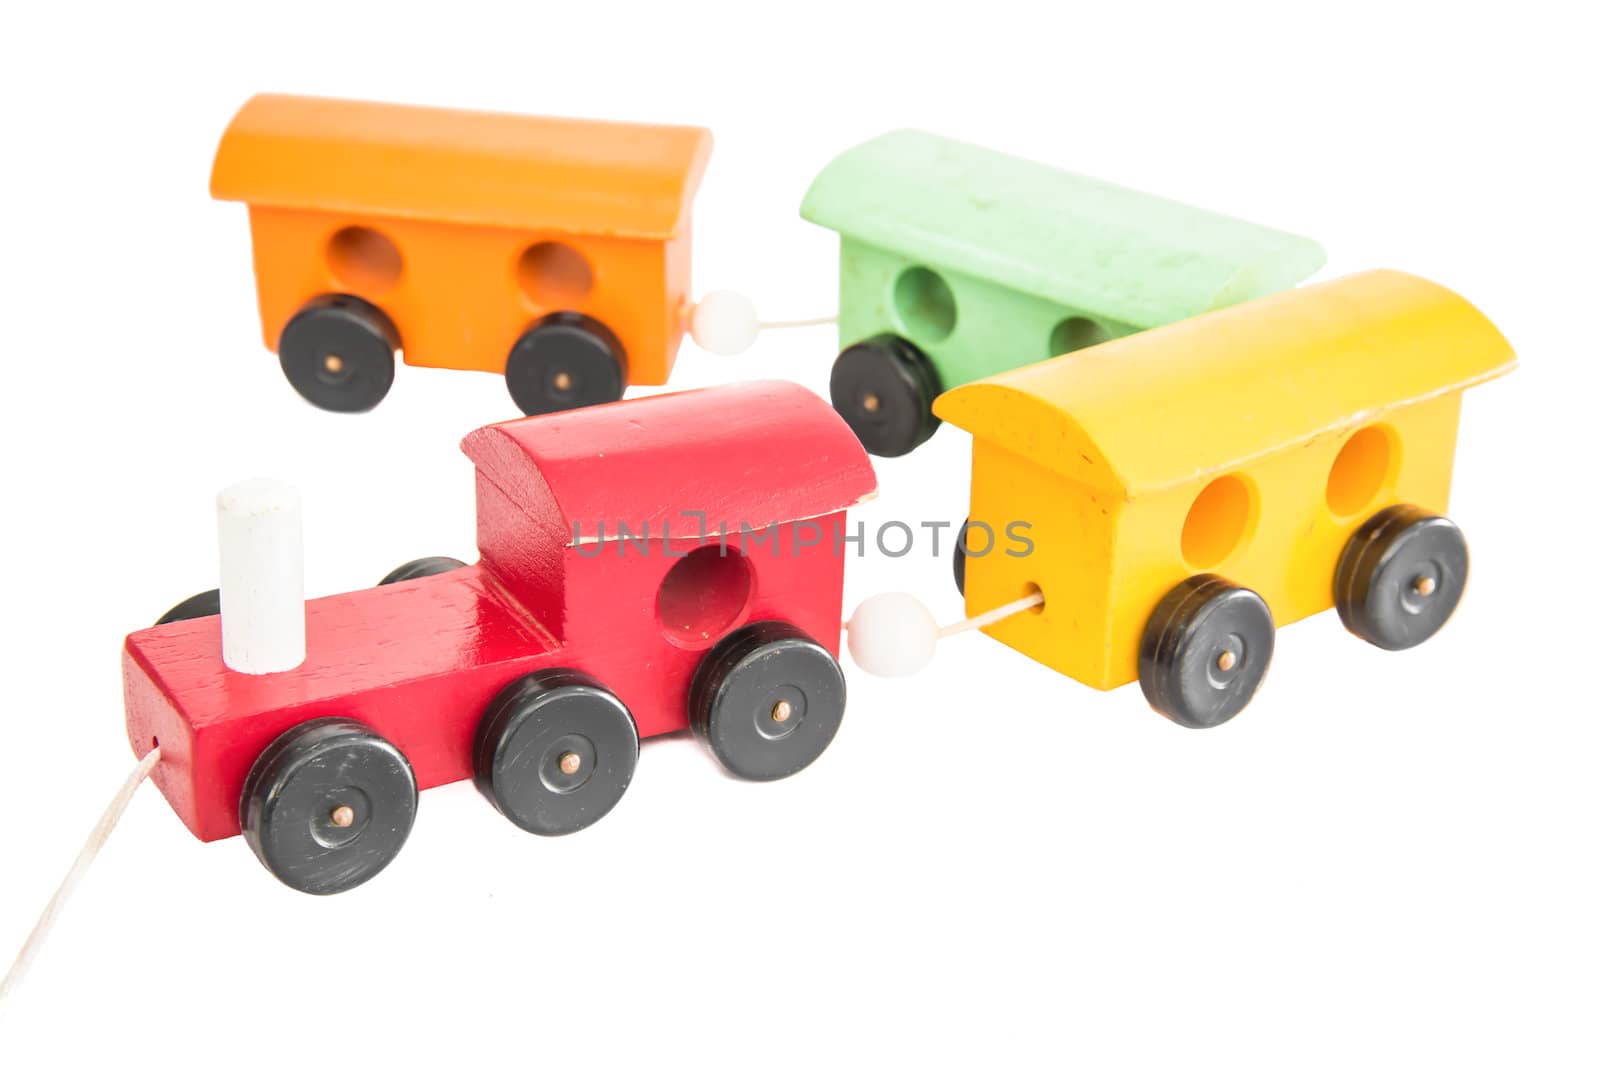 Colorful wooden toy train by wmitrmatr